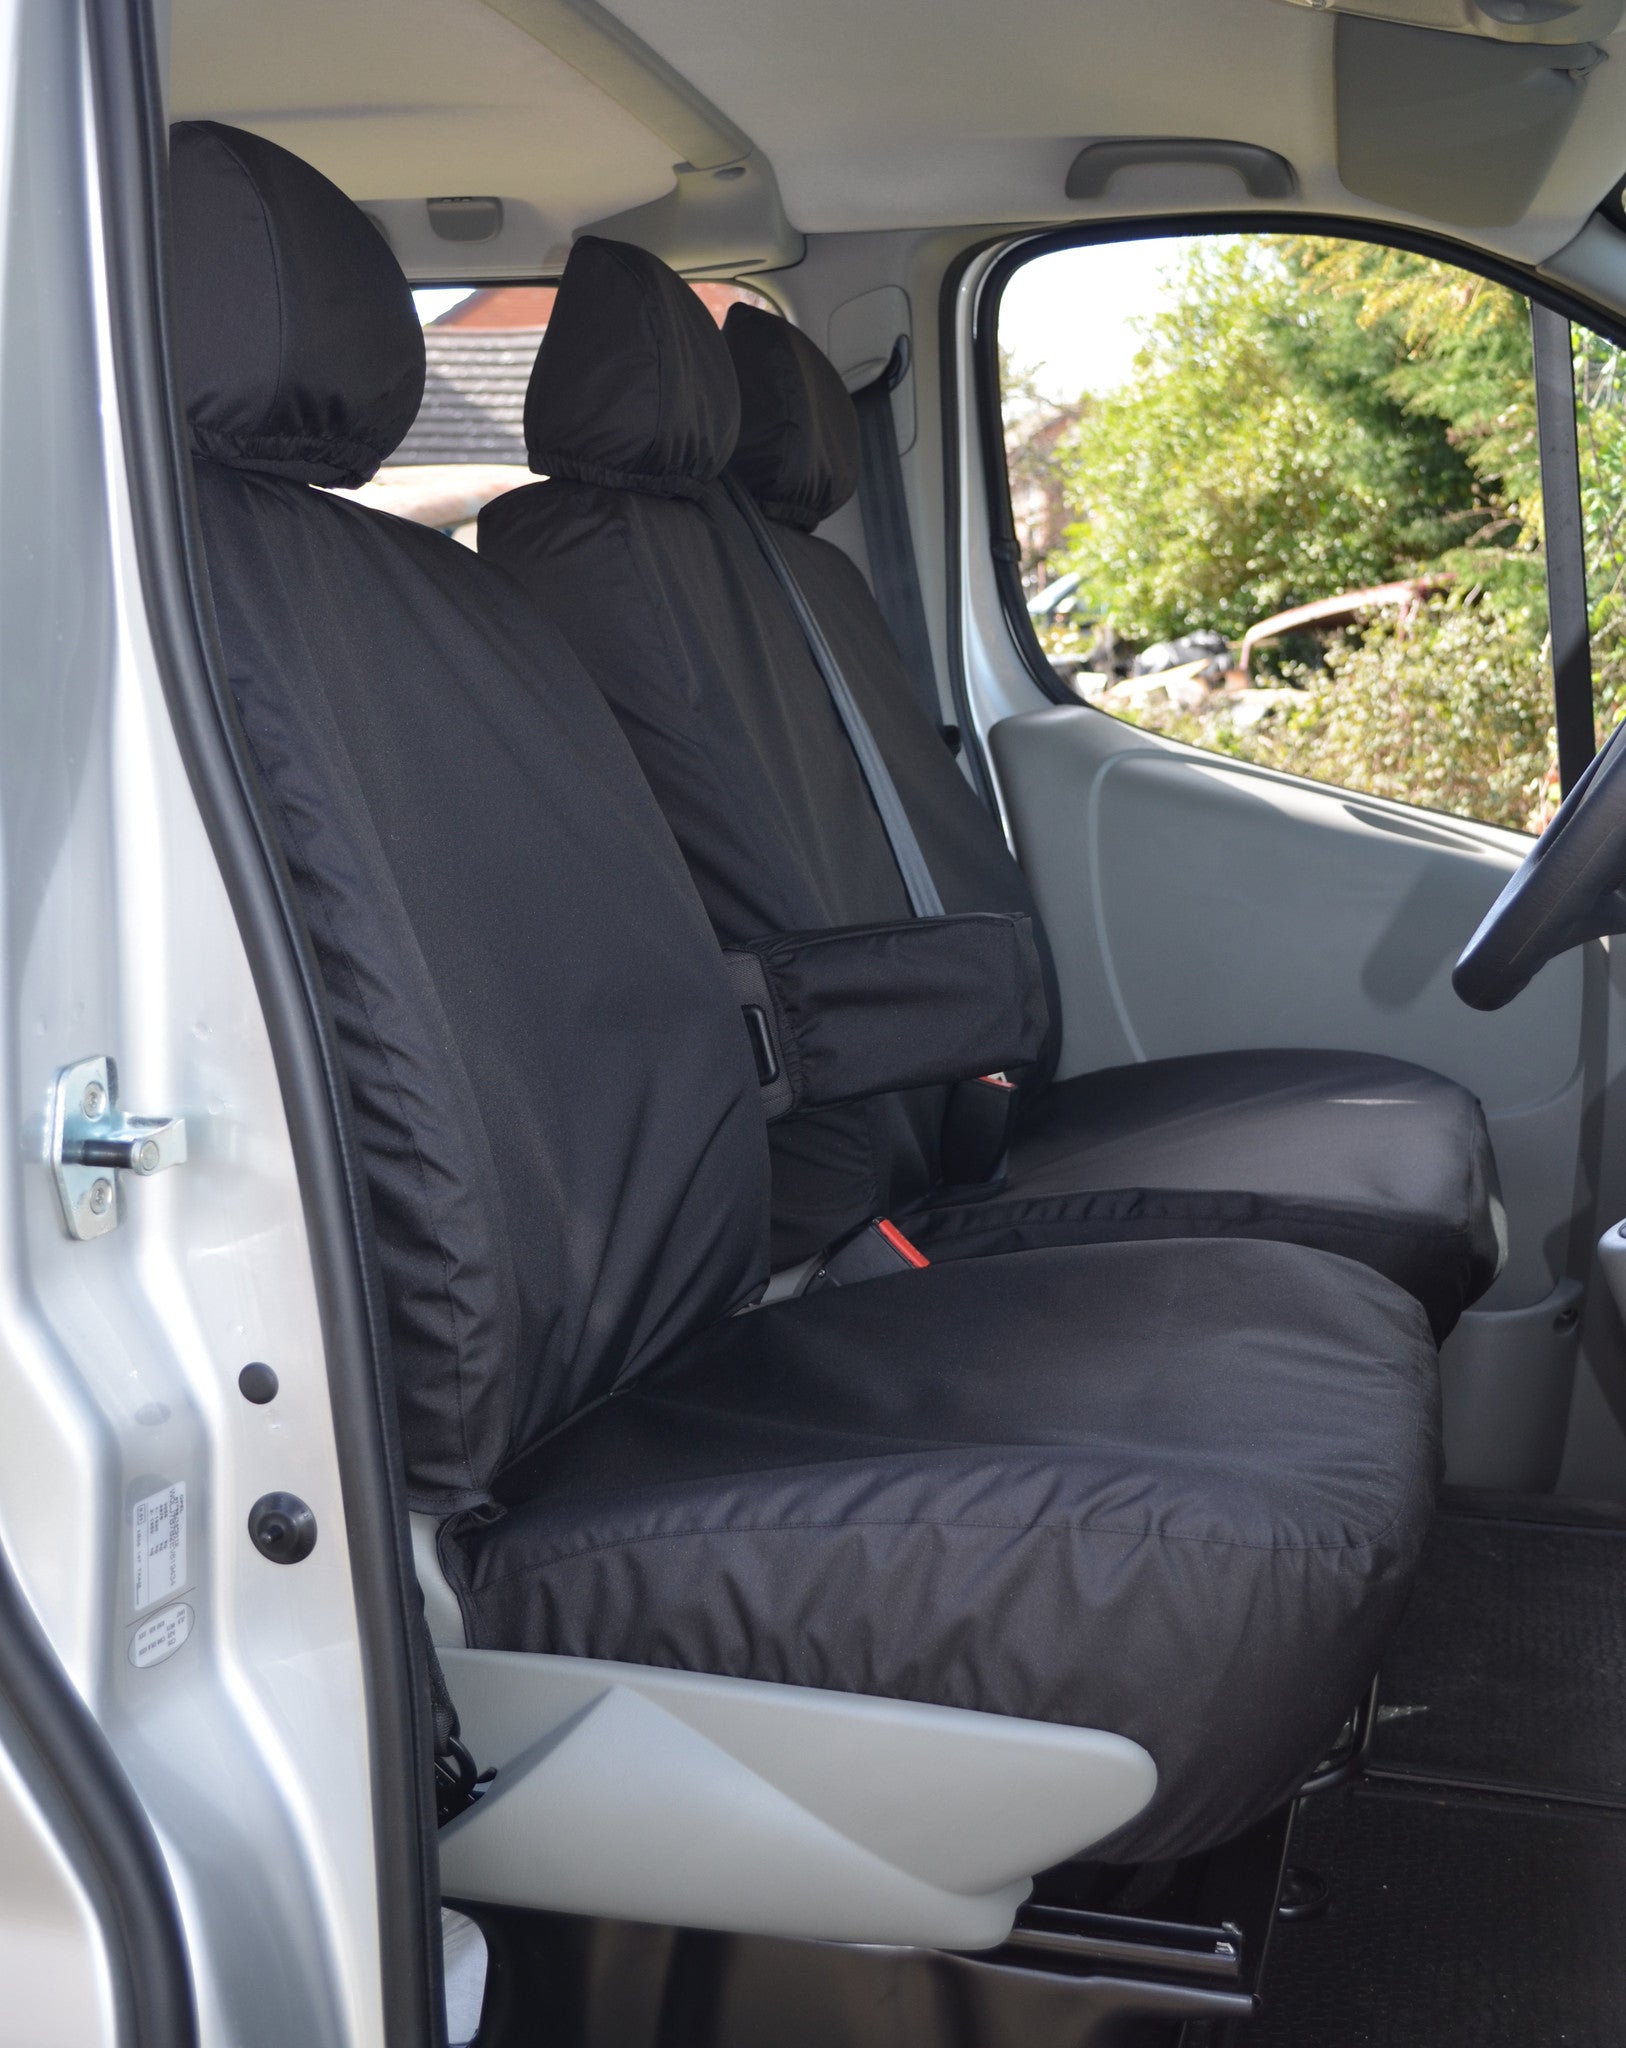 Vauxhall Vivaro 2006 - 2013 Tailored Front Seat Covers Black / With Driver's Armrest Turtle Covers Ltd